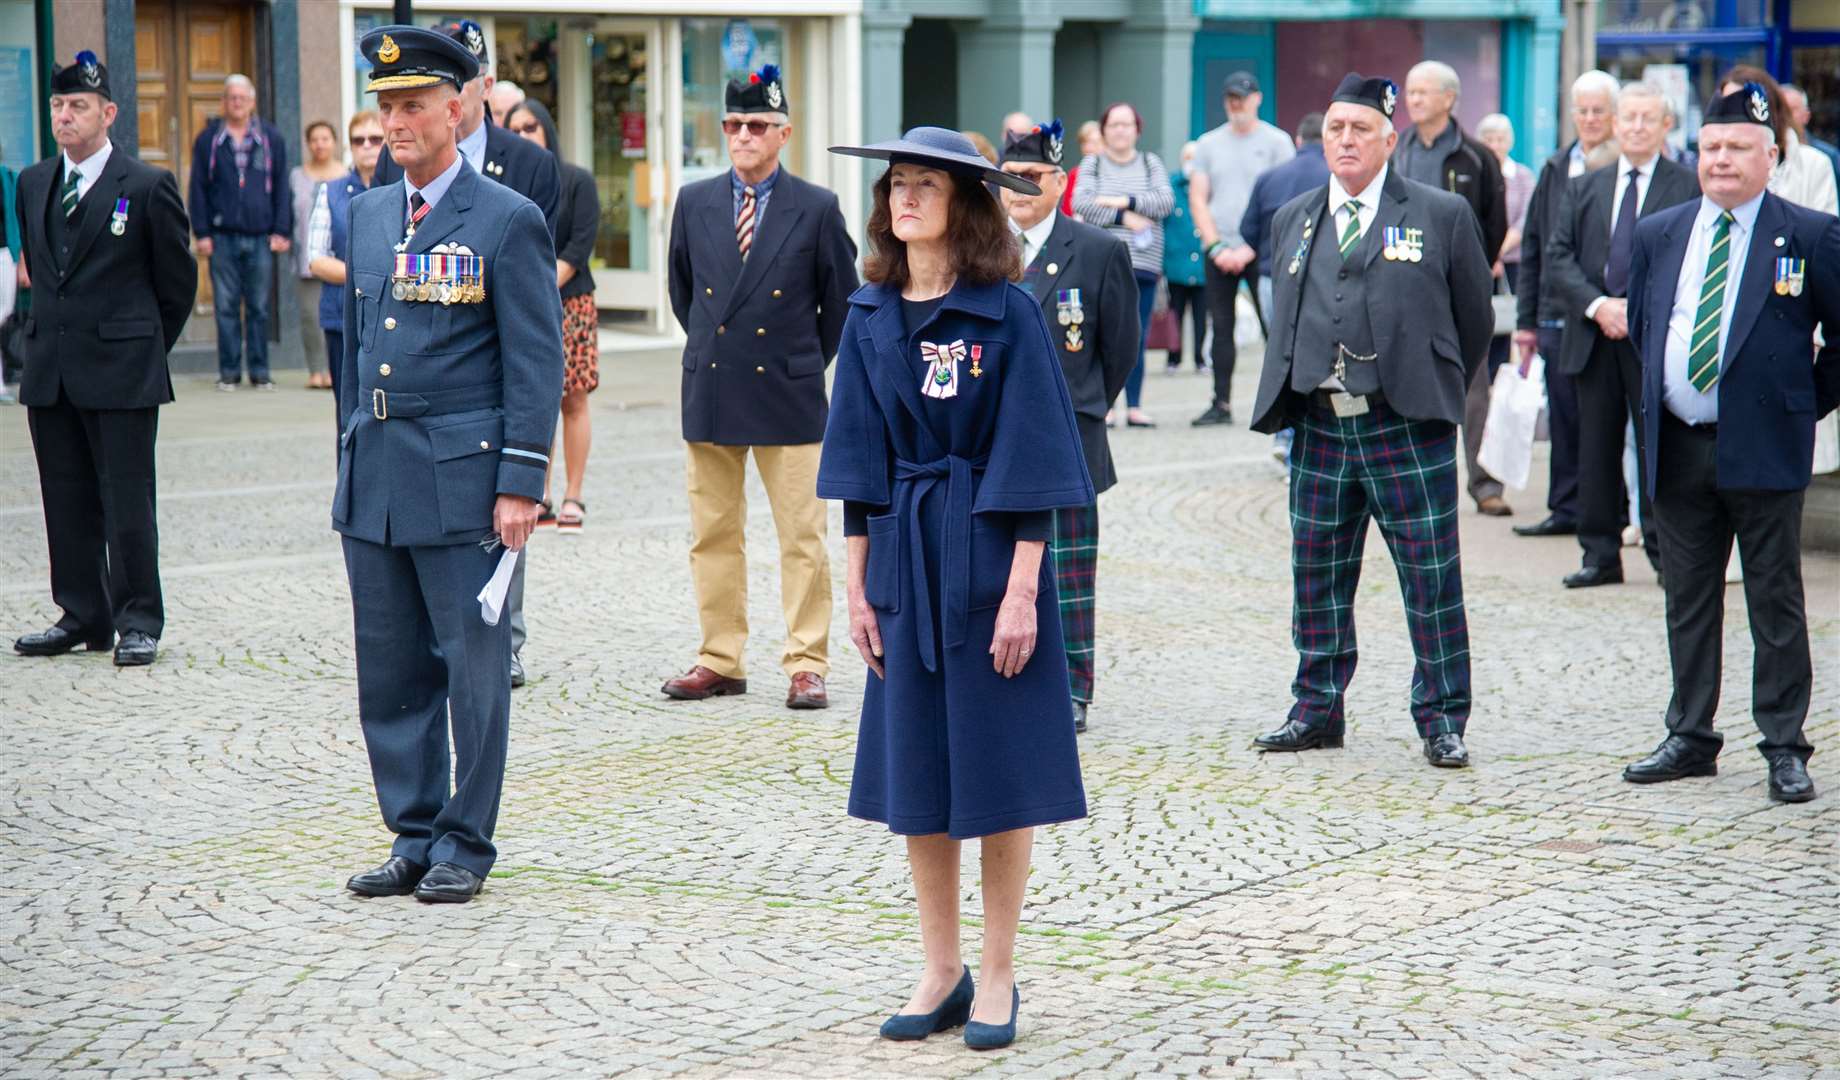 Vice Lord-Lieutenant Nancy Robson salutes the war memorial during the service at Elgin's Plainstones on Saturday to commemorate the 75th anniversary of Victory over Japan (VJ Day). Picture: Daniel Forsyth.